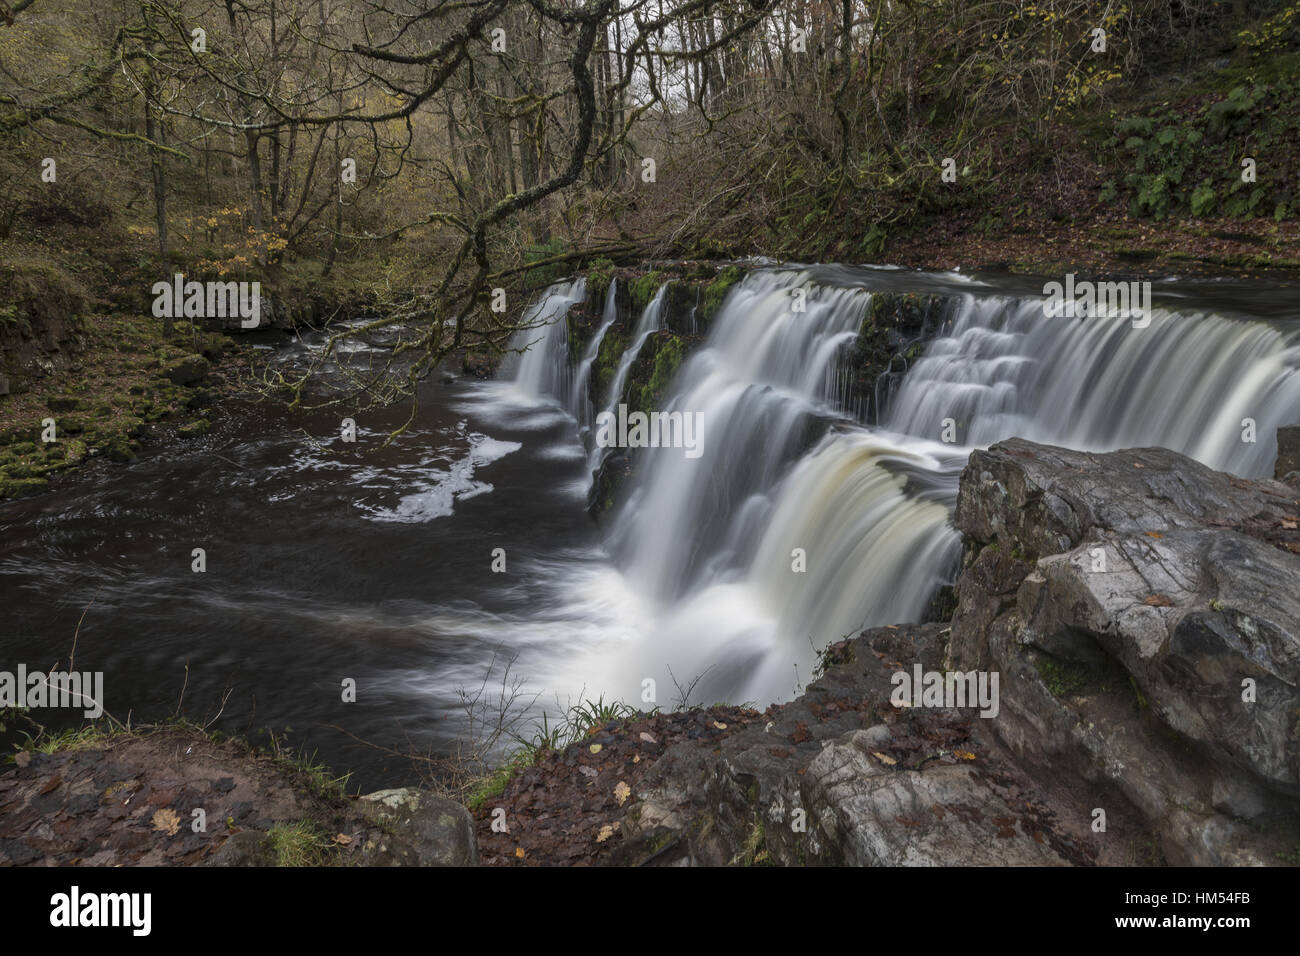 Sgwd y Pannwr, fall of the fuller, on Afon Mellte, Ystradfellte, four waterfalls, Brecon Beacons. Stock Photo